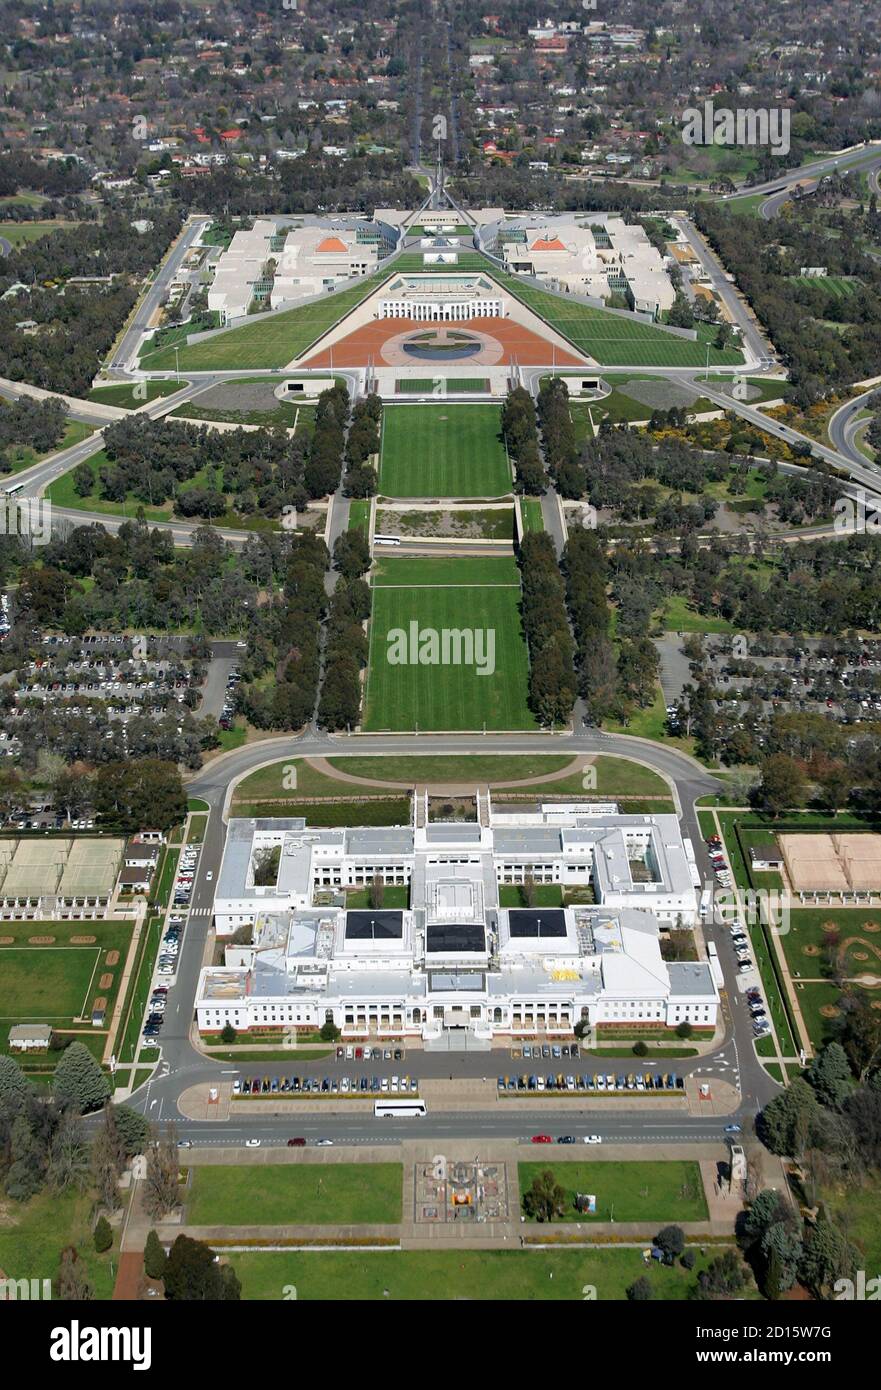 Aerial view of the Australian Parliament House (top) Canberra with the former parliament building, now the National Portrait Gallery, the foreground September 26, 2005. Wimborne Stock Photo Alamy